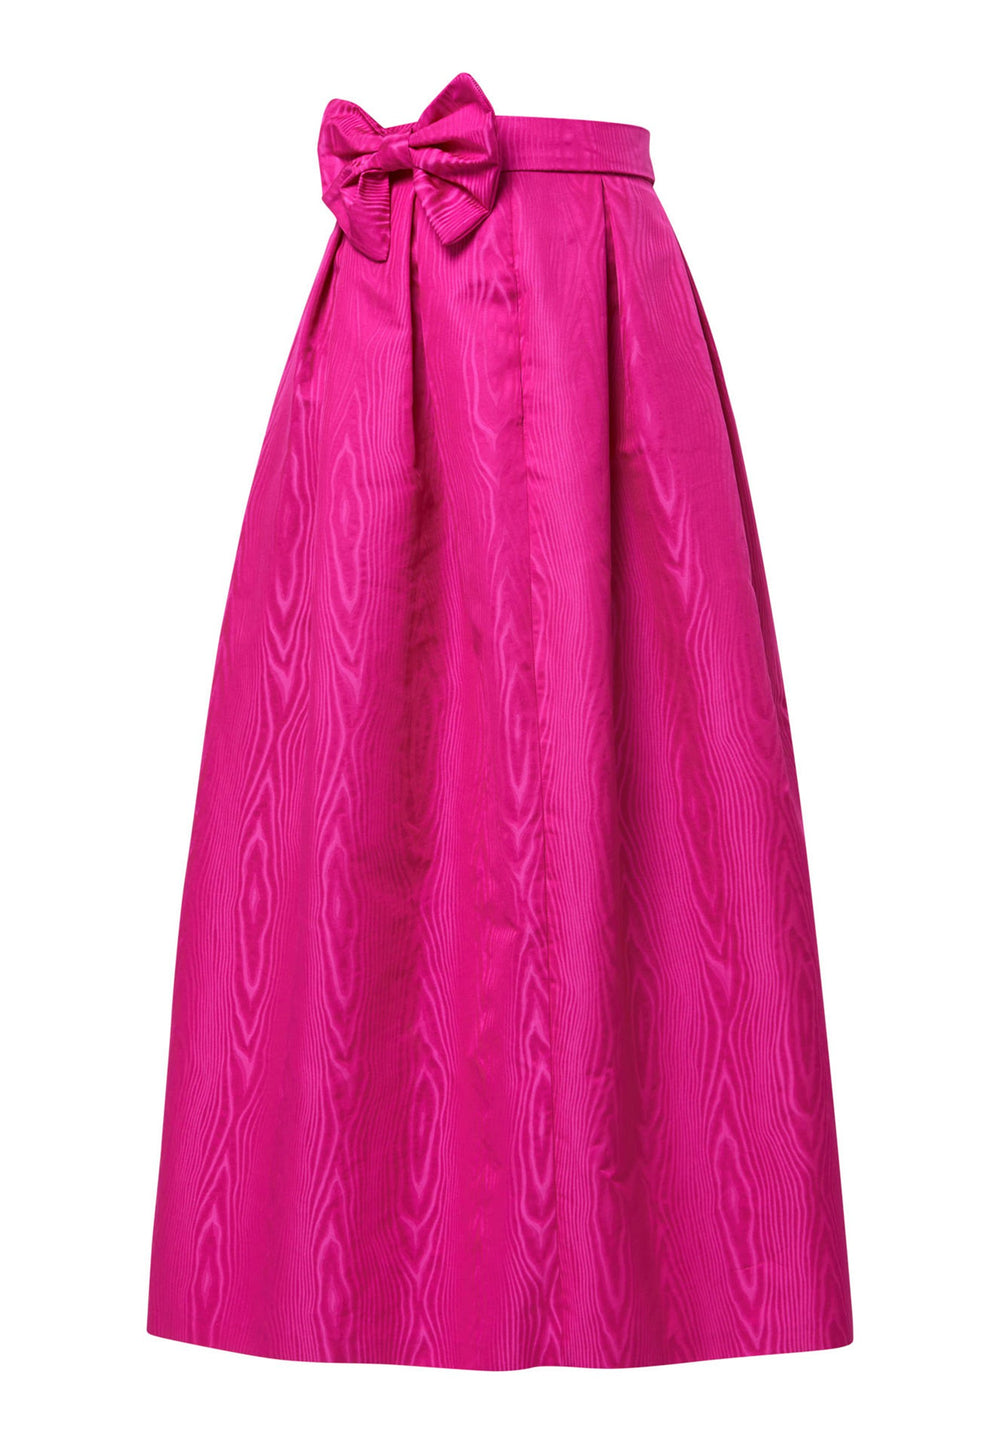 Introducing the Kennedy Cerise Pink Skirt, a sophisticated and chic piece inspired by 1950s fashion. This full-length A-line skirt features a stiff structure, reminiscent of the iconic 50s style. The moire pattern adds a unique and elegant touch to the design, creating a captivating visual effect. Complete with pleats around the waistline and a detachable bow belt, this skirt captures the essence of timeless glamour. 